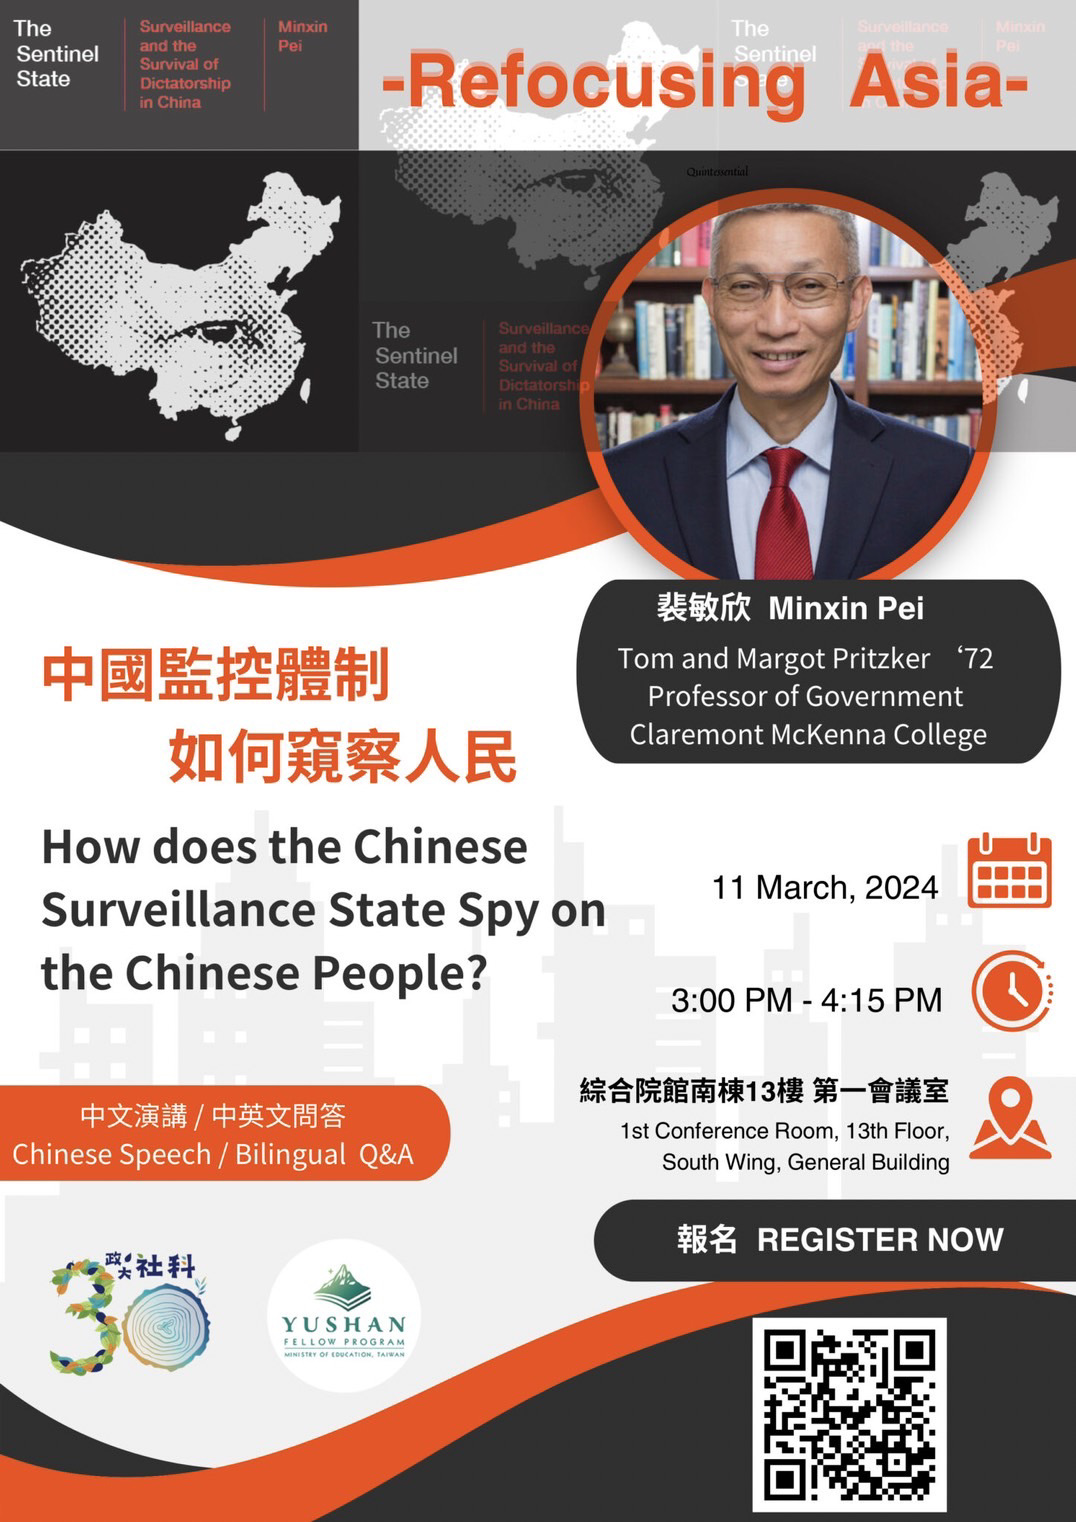 How does the Chinese Surveillance State Spy on the Chinese People?